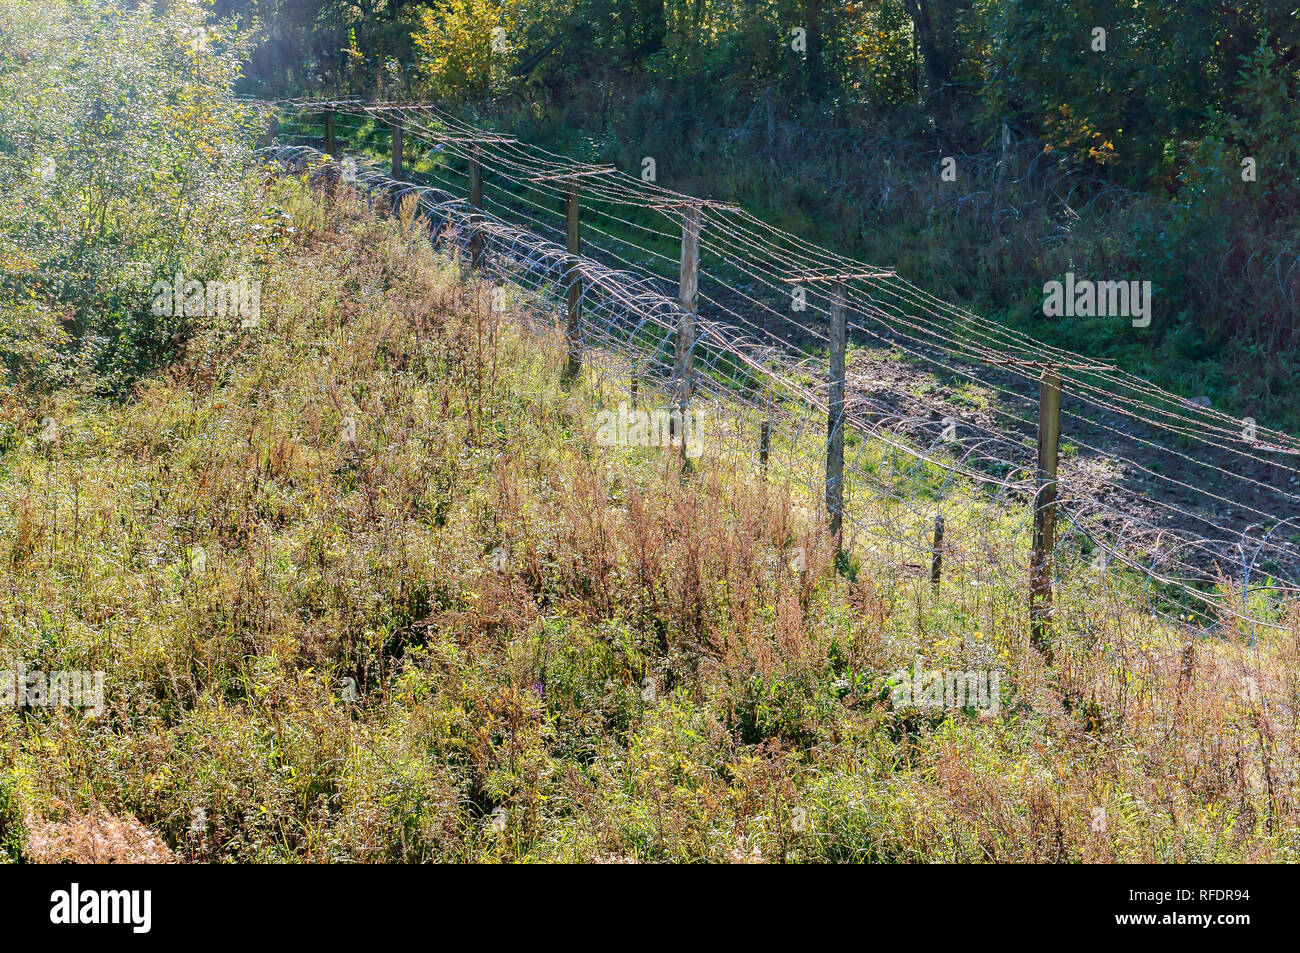 fencing territory with barbed wire, barbed wire fence Stock Photo